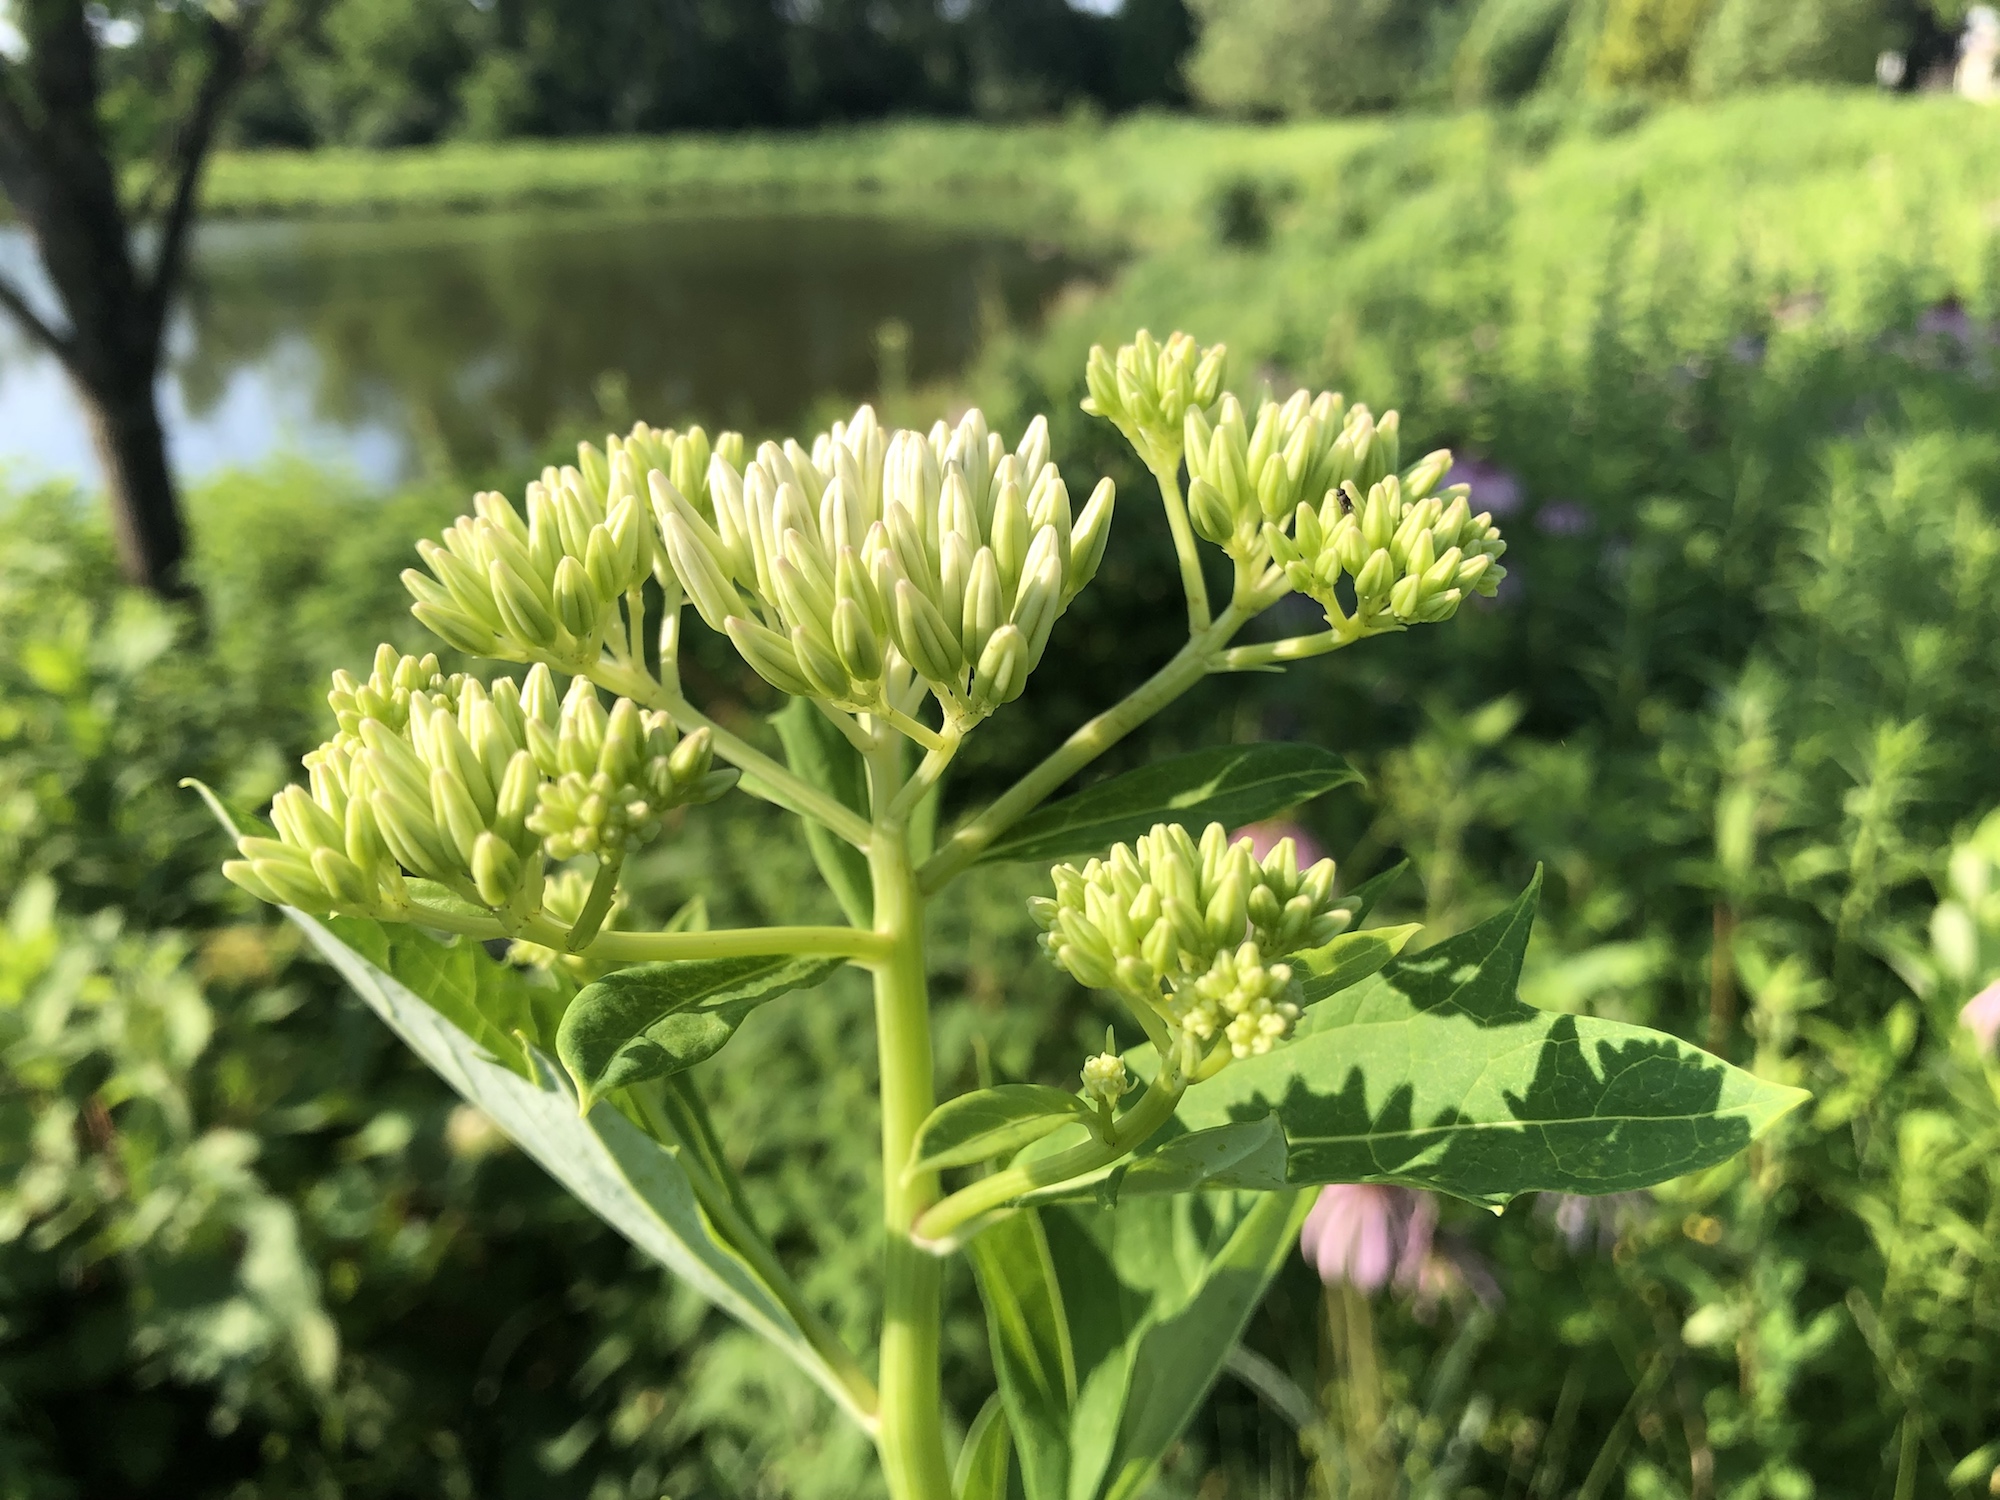 Pale Indian Plantain by Retaining Pond in Madison, Wisconsin on July 7, 2019.